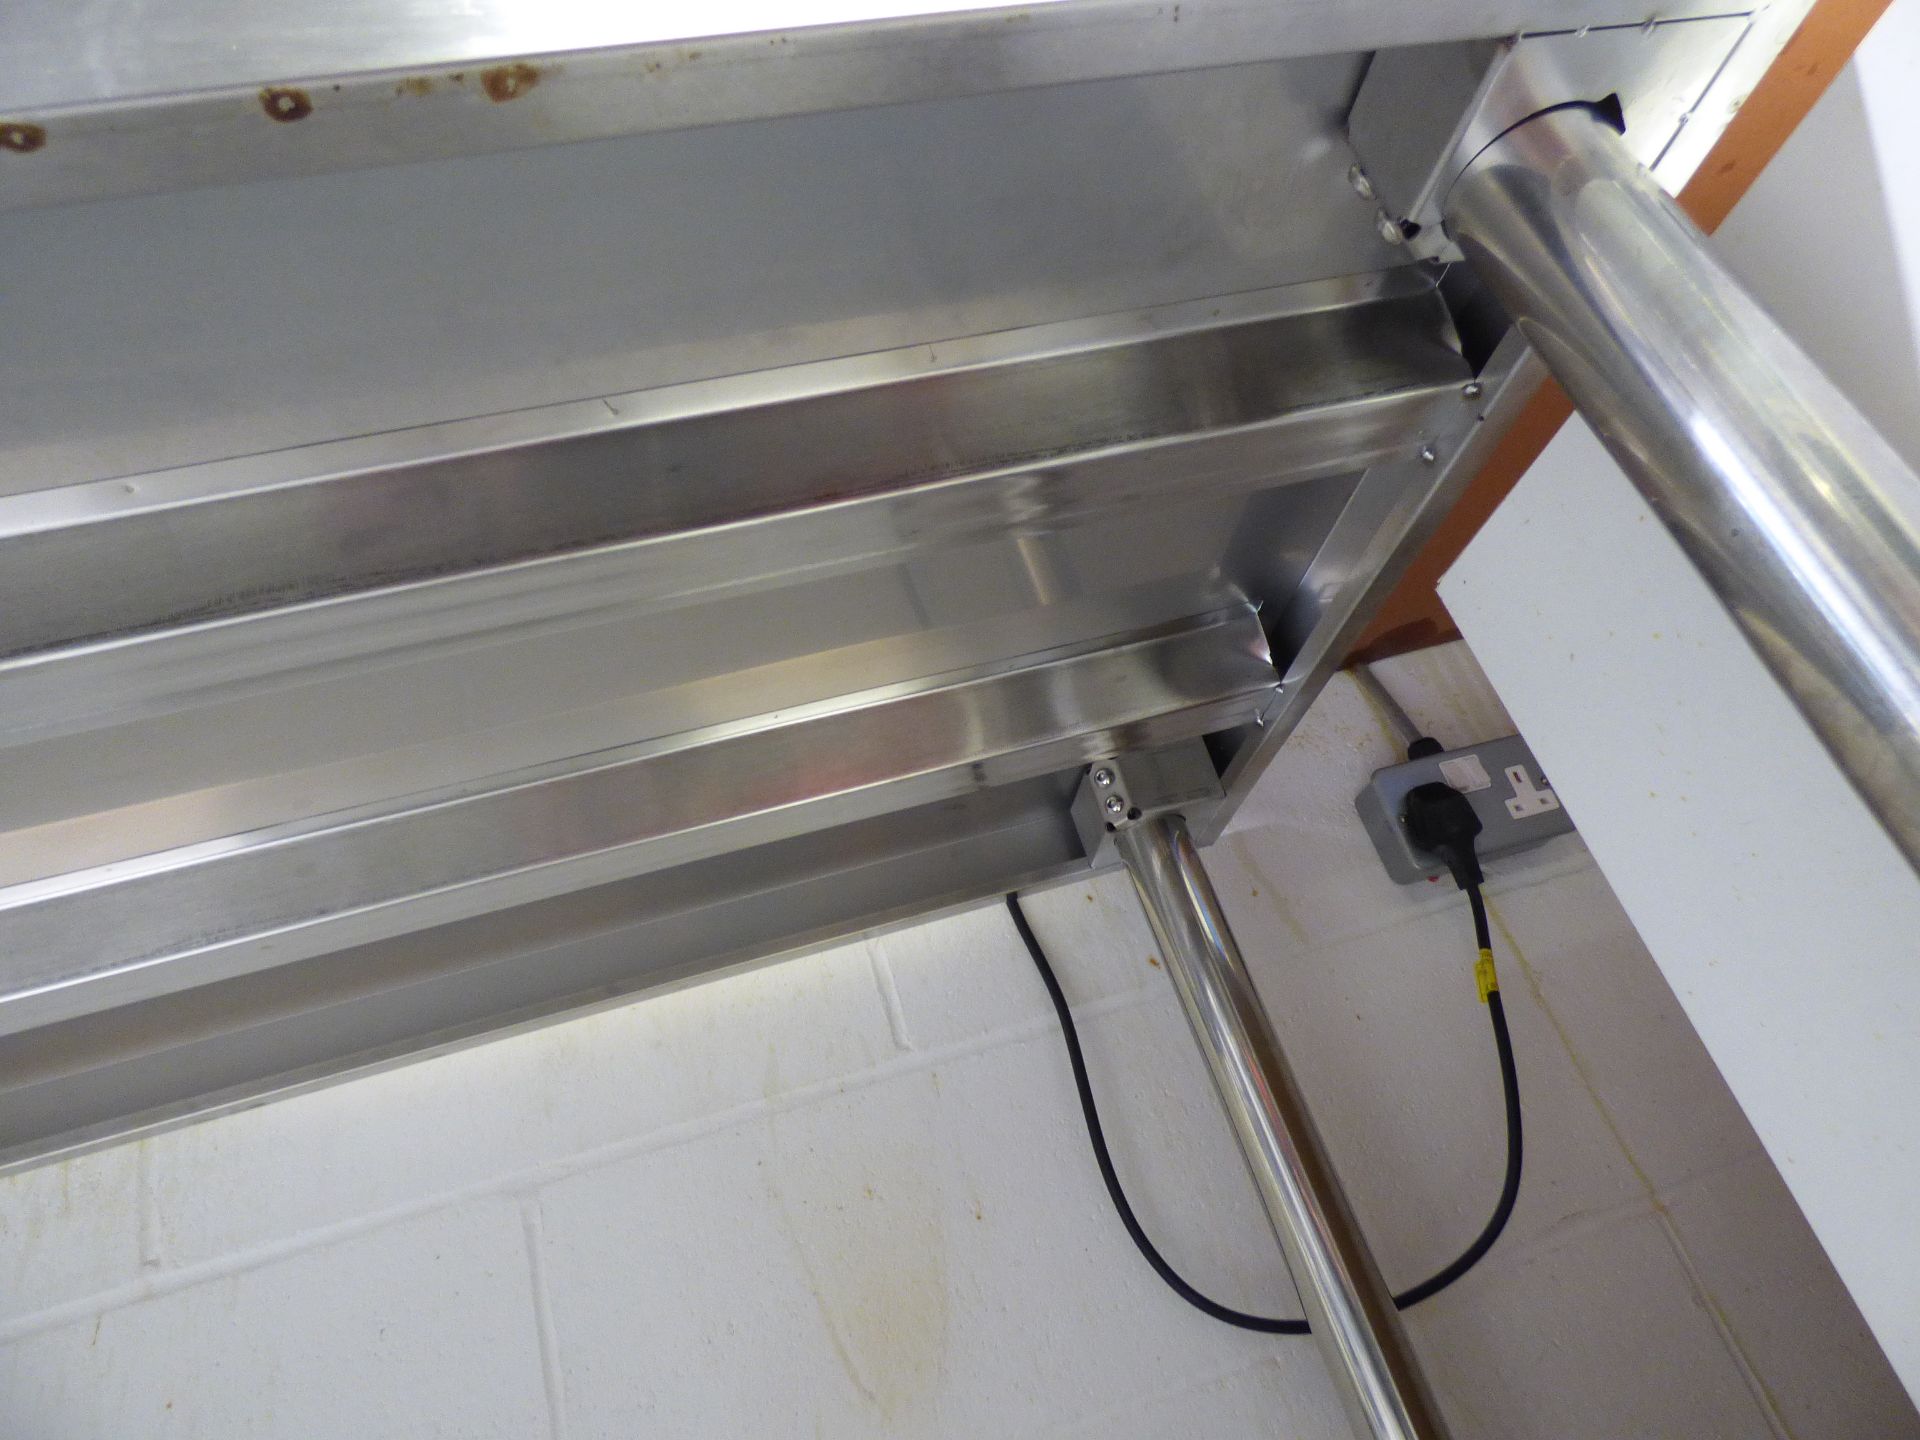 Stainless Steel Work Surface/Shelf Unit - Image 2 of 6